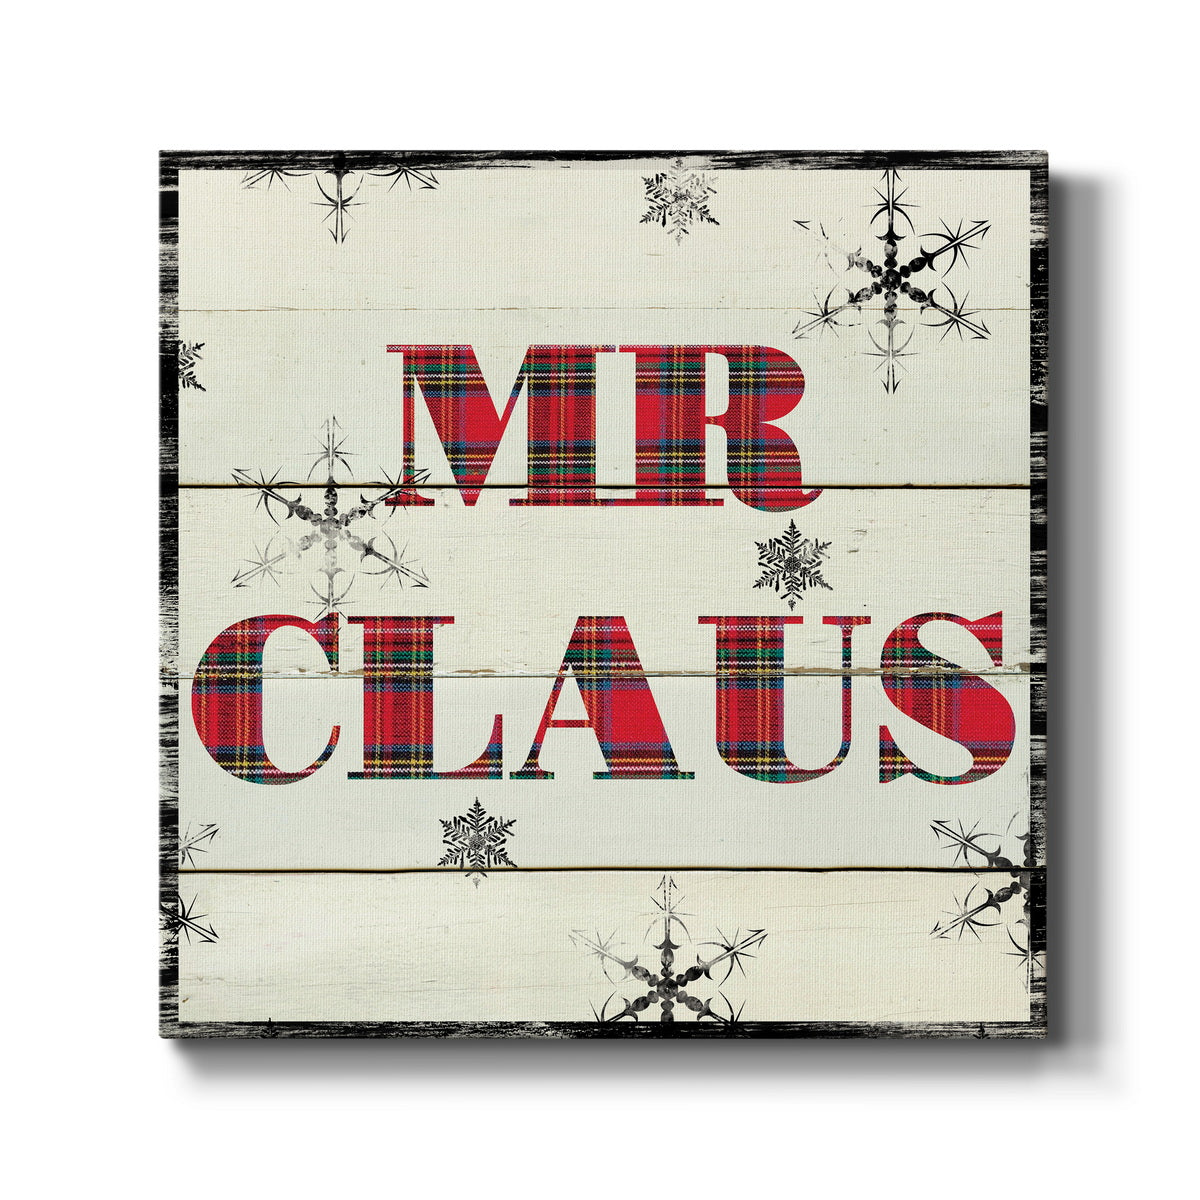 Mr. Claus-Premium Gallery Wrapped Canvas - Ready to Hang